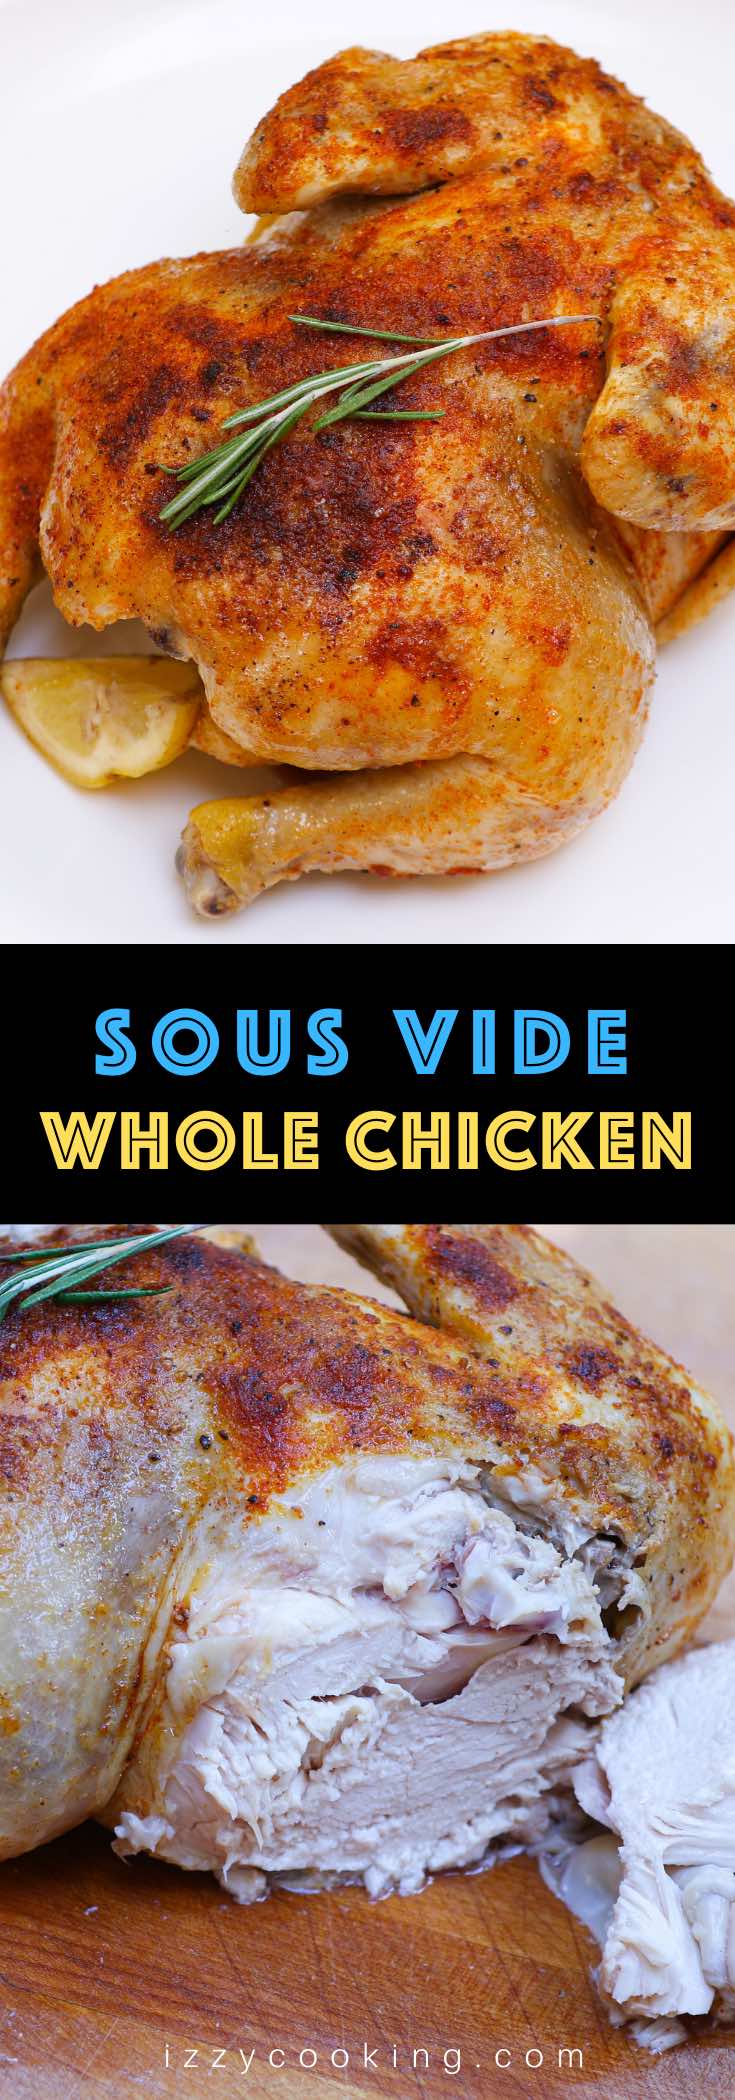 Sous Vide Whole Chicken is one of the most delicious recipes for a whole chicken – tender, juicy, and perfectly “roasted” rotisserie-style chicken (not poached) in your sous vide water bath! It’s gluten-free, paleo, and whole 30. #SousVideWholeChicken